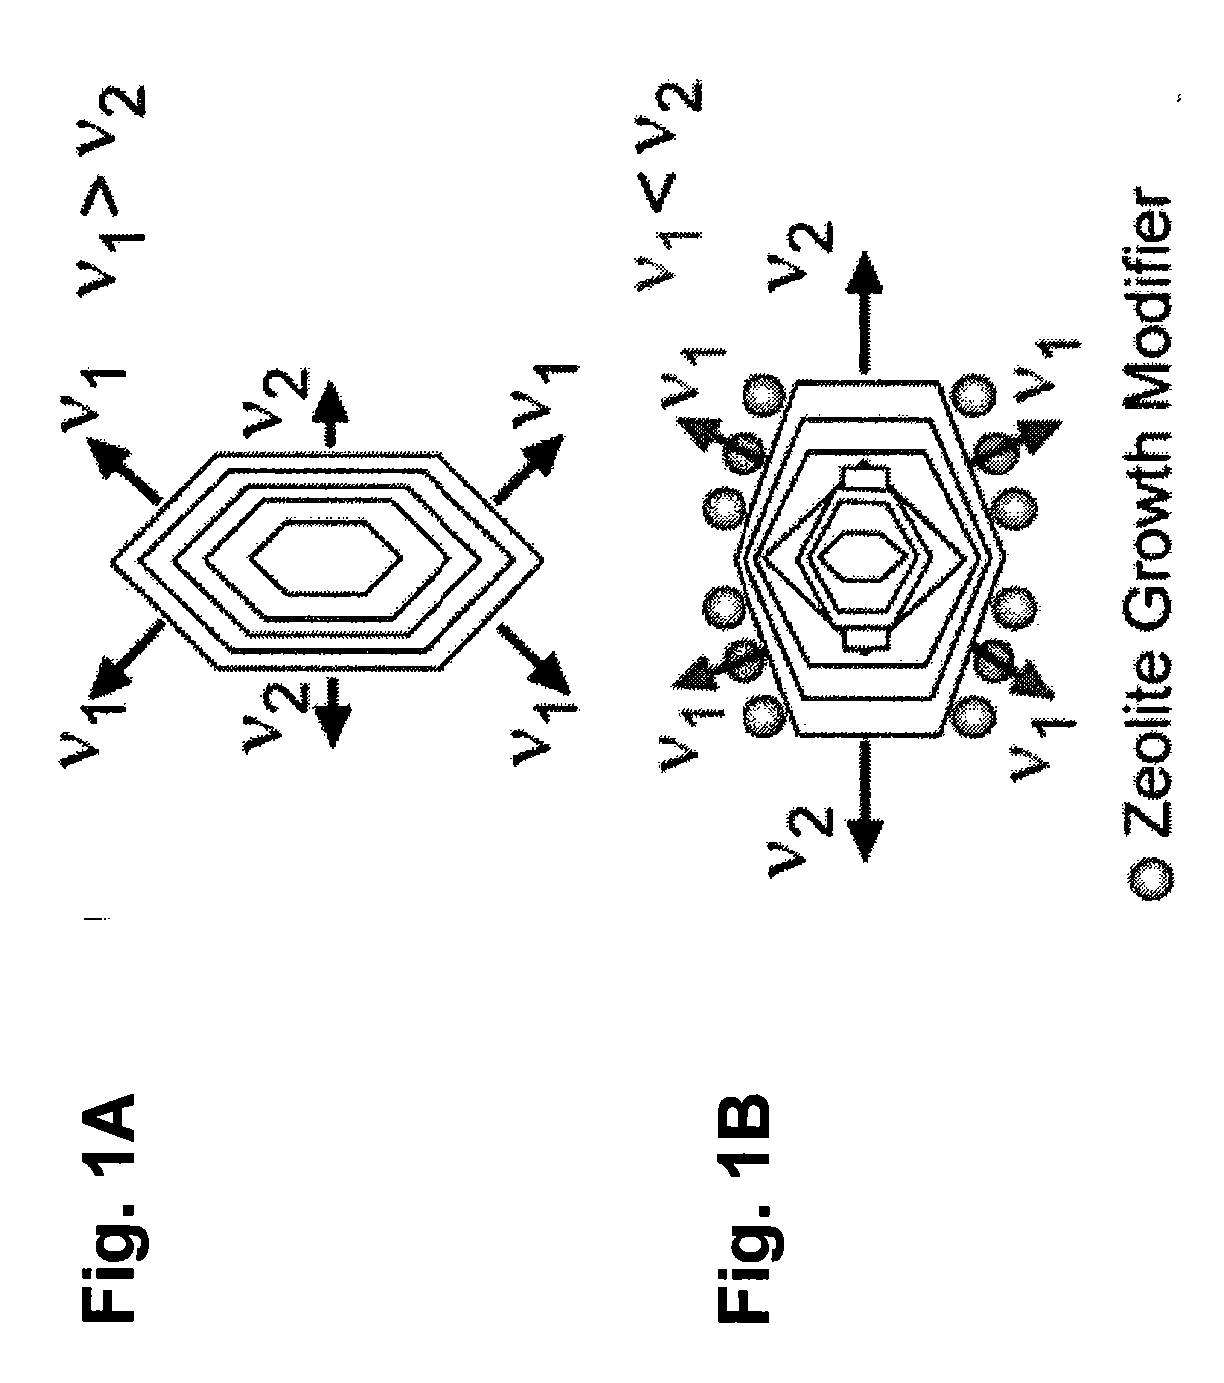 Zeolite compositions and methods for tailoring zeolite crystal habits with growth modifiers